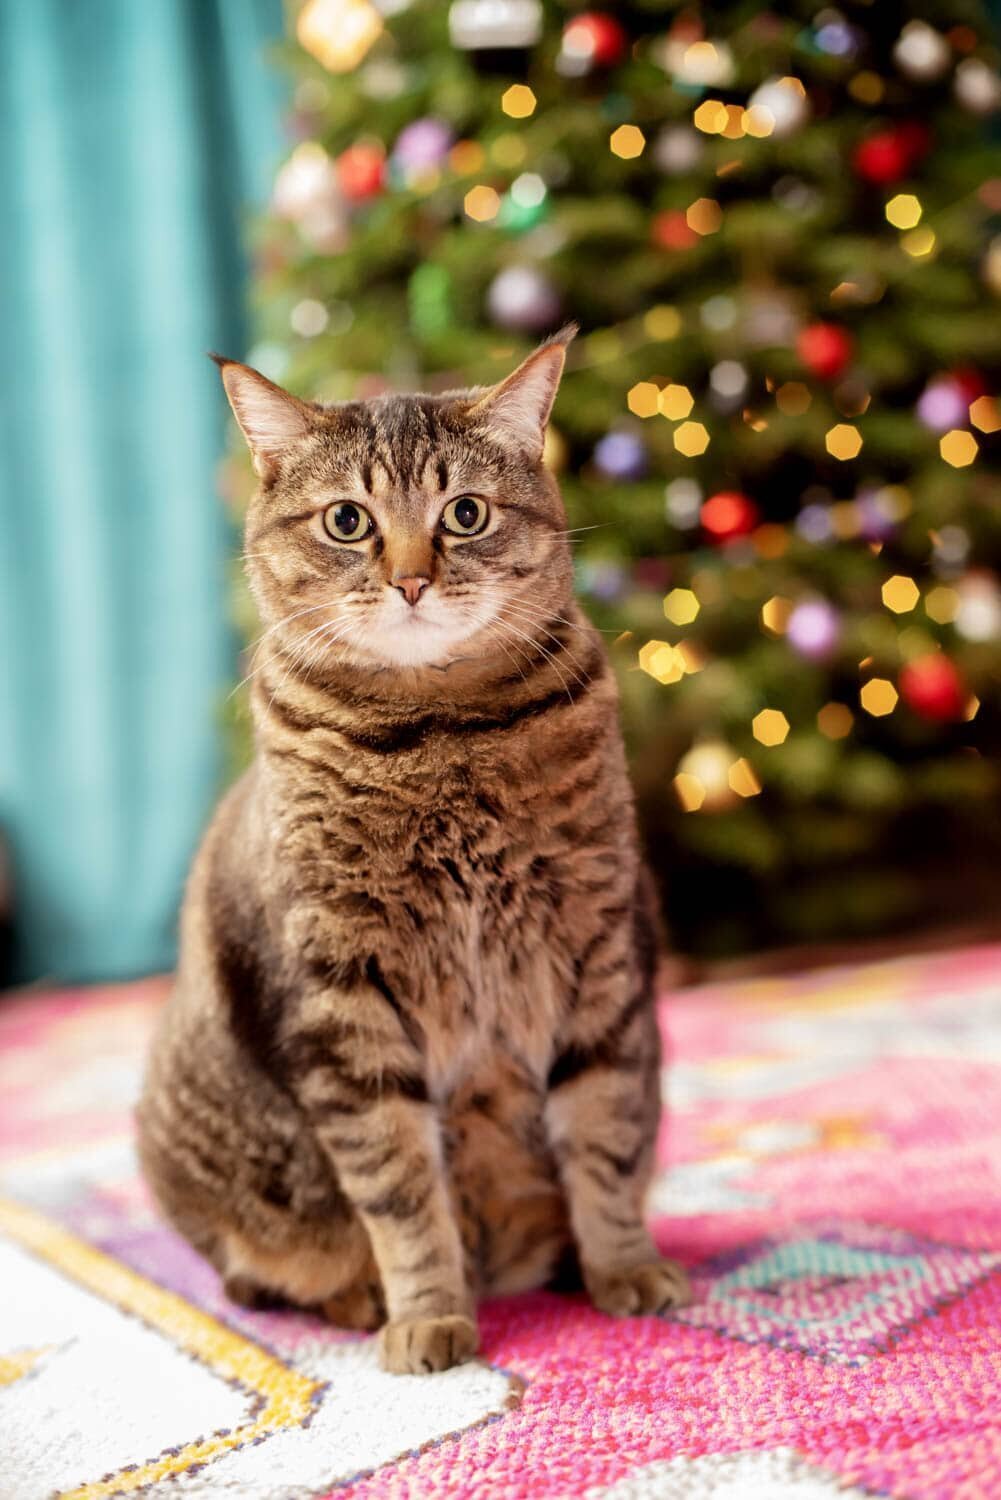 crystal genes photography's cat Coltrane looks model perfect in front of christmas tree lights